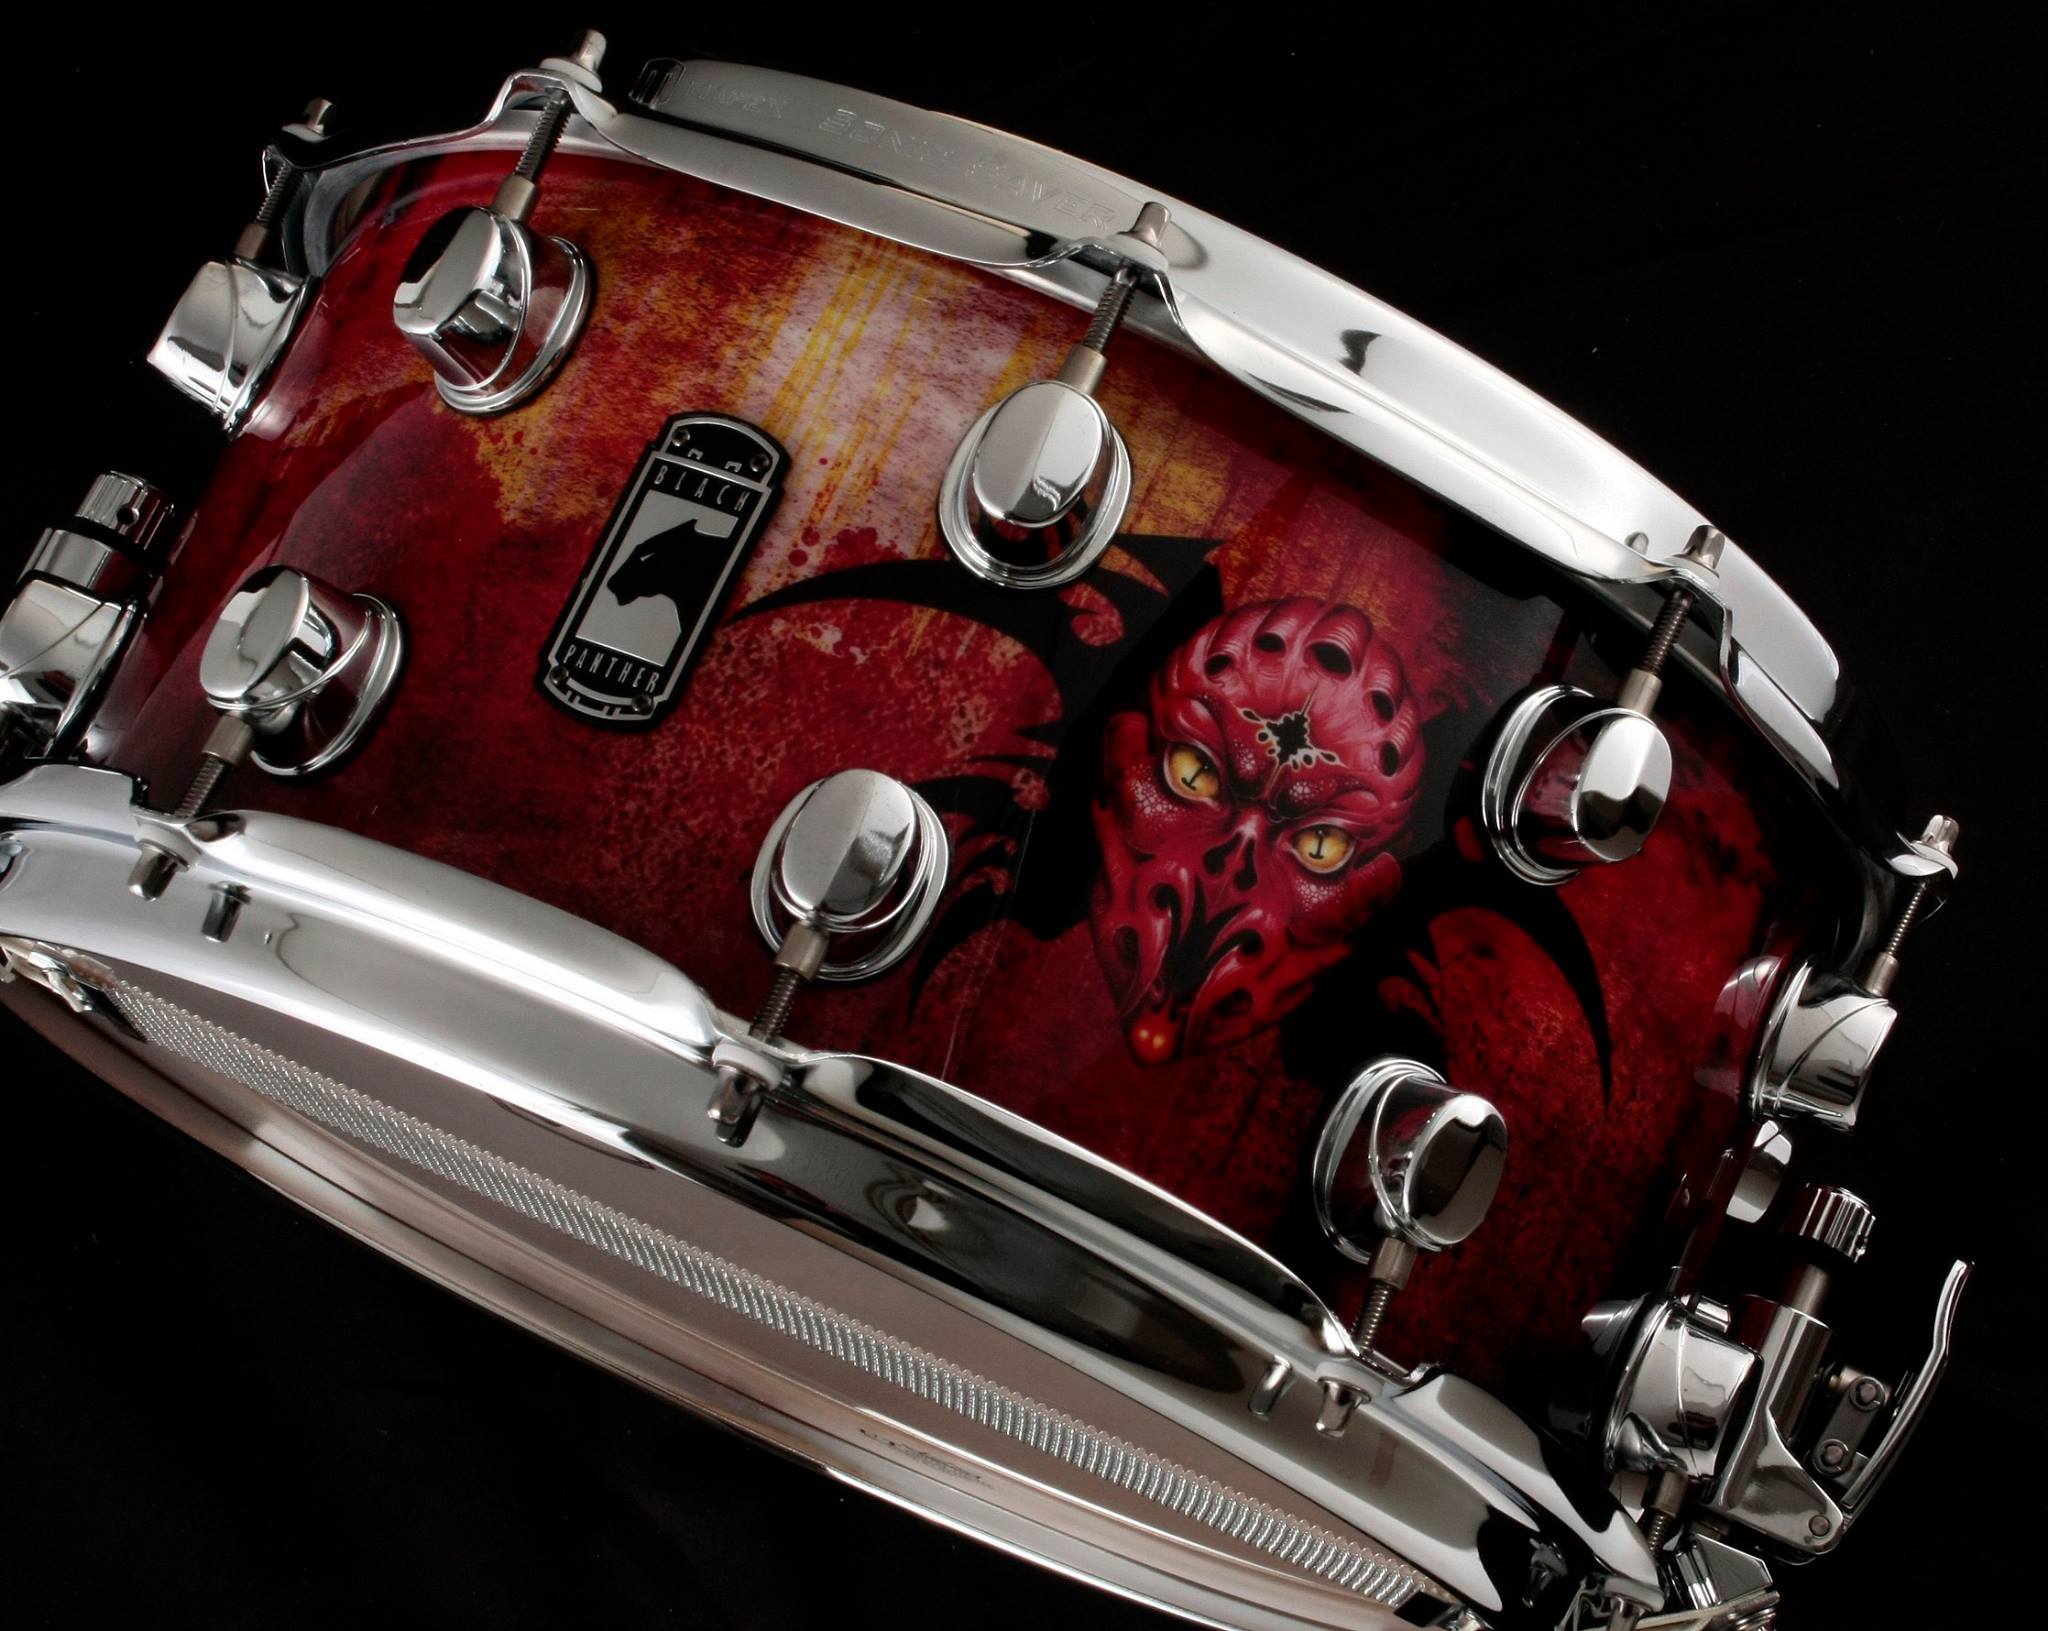 14 x 7 Psych-Octopus (Aquiles Priester Signature Snare)